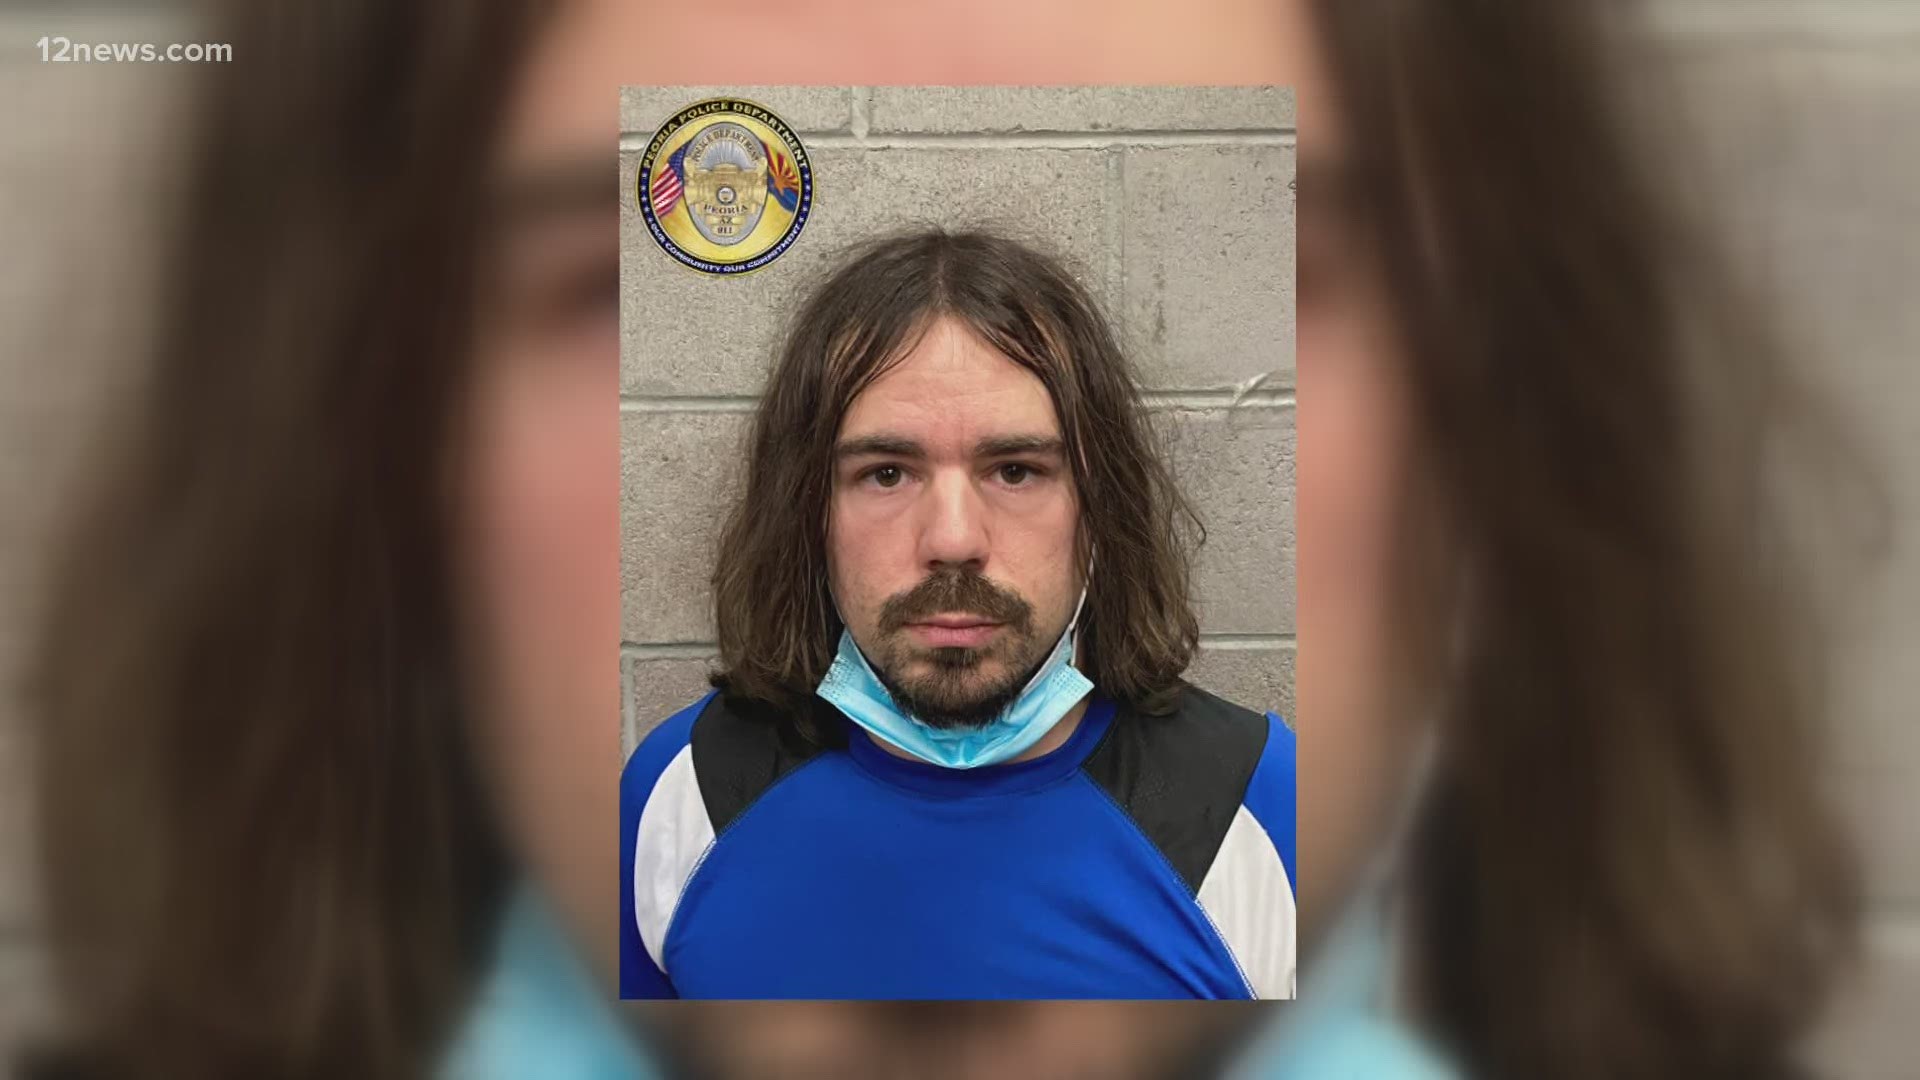 Police say Carl Nathaniel Fredricksen, 34, is suspected of child molestation, exploitation and sexual conduct with a minor.